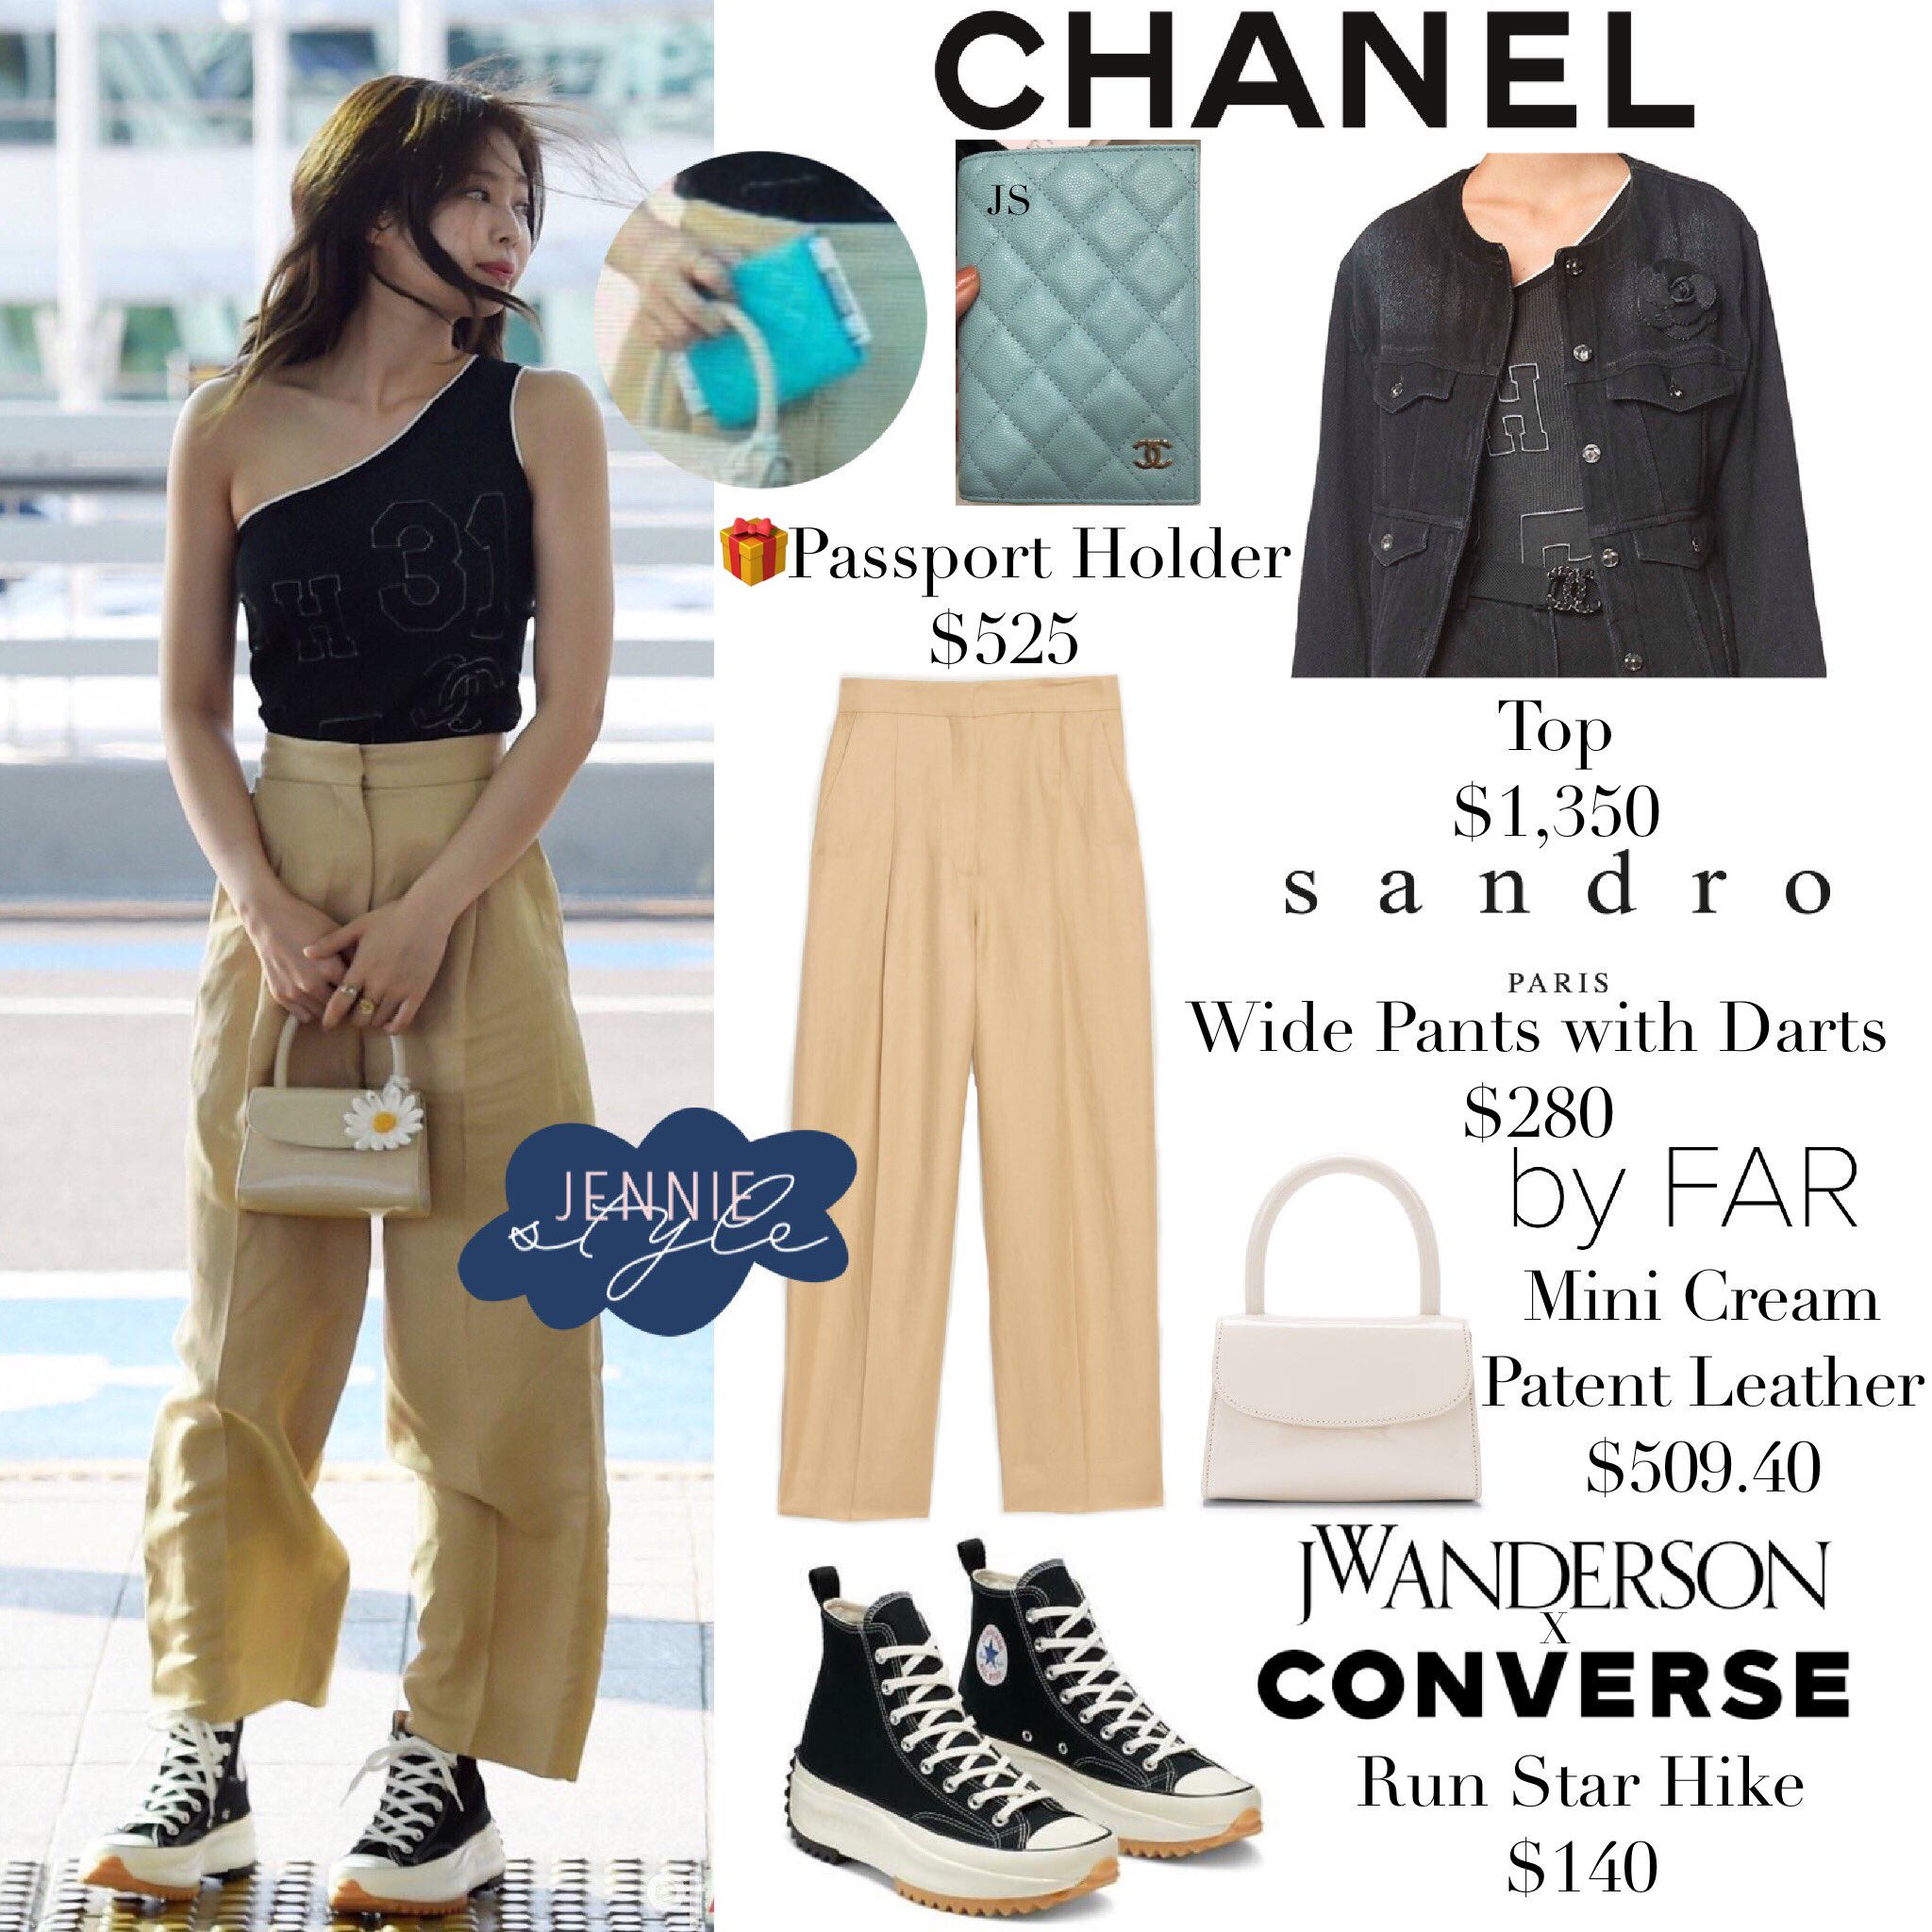 What Blackpink's Jennie wore at the Chanel fall/winter 2022 show